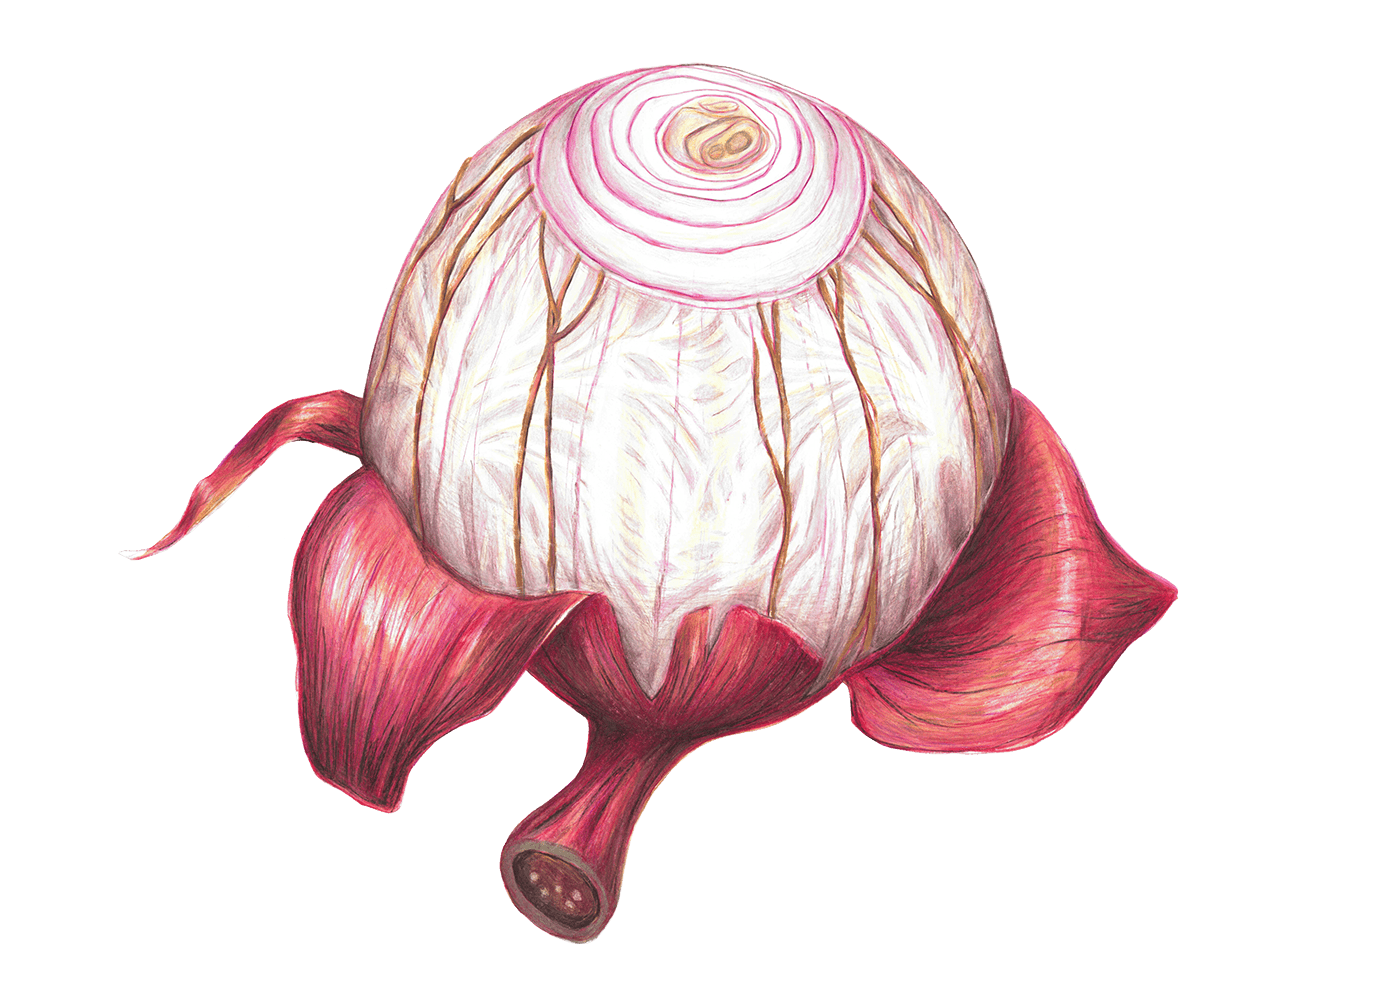 colored pencil ILLUSTRATION  ilustrazione Onion drawing poetry illustration TRADITIONAL ART inspire